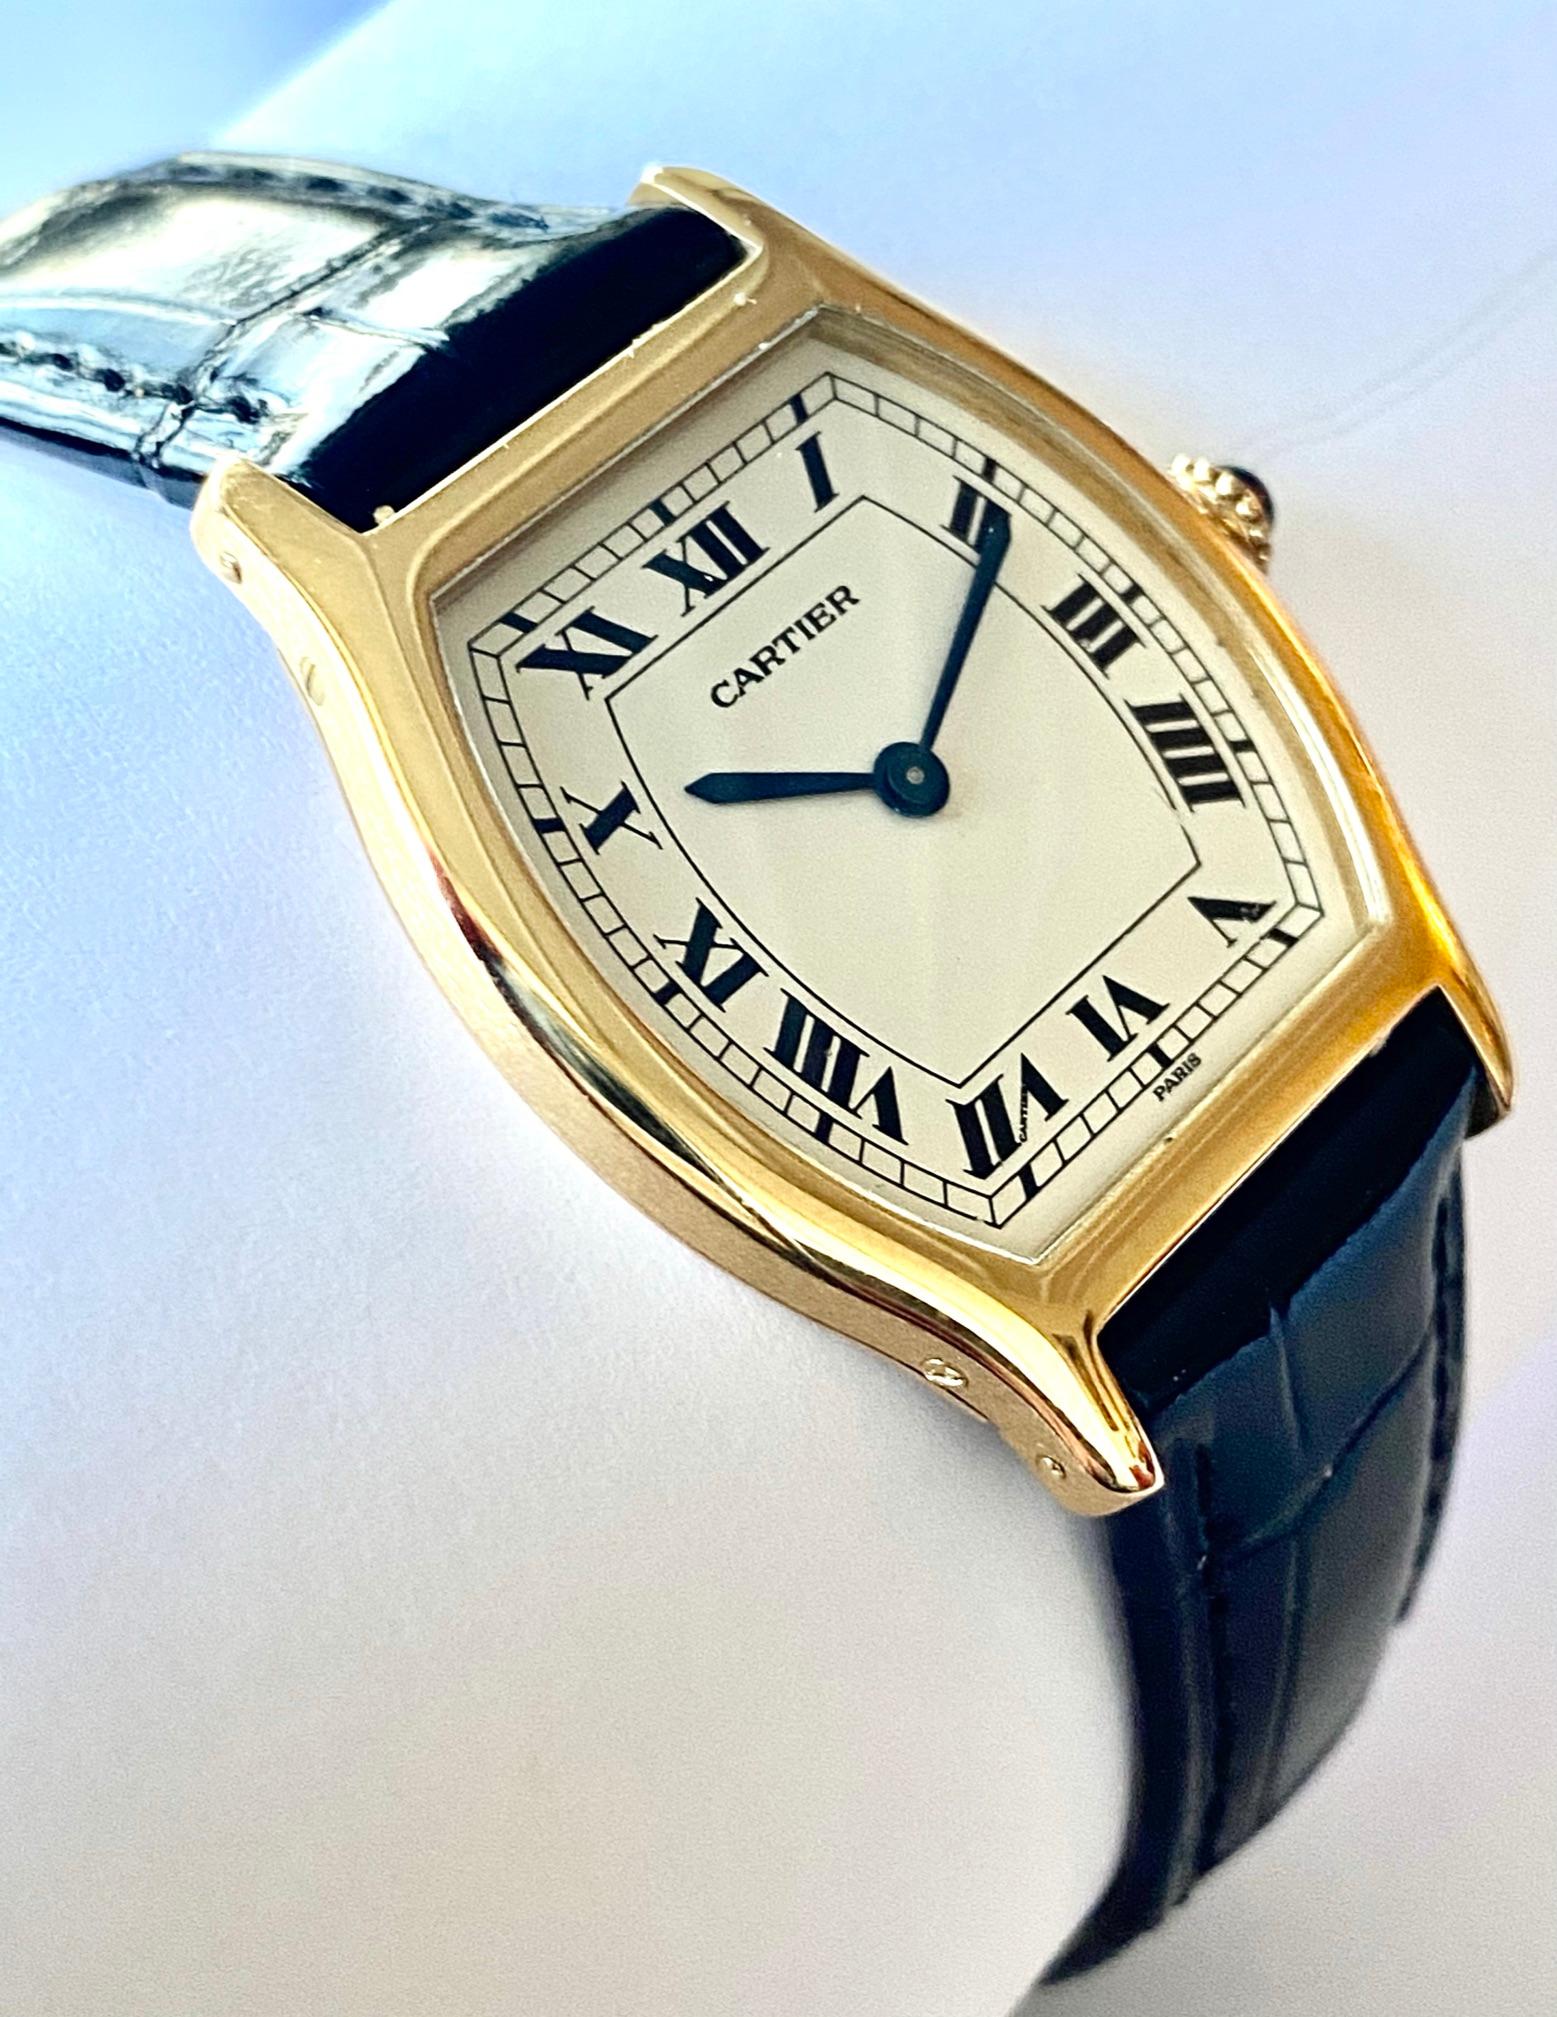 One (1) 18K. Yellow Gold Watch with a leather strap
Brand: Cartier    Paris     ca 1975
Model: Tortue  extra flat   Model nr 96069   nr 45!
Mouvement: Piquet nr 21 extra flat handwinding  mouvemnet nr 14613
Leather Cartier Kroko strap with original